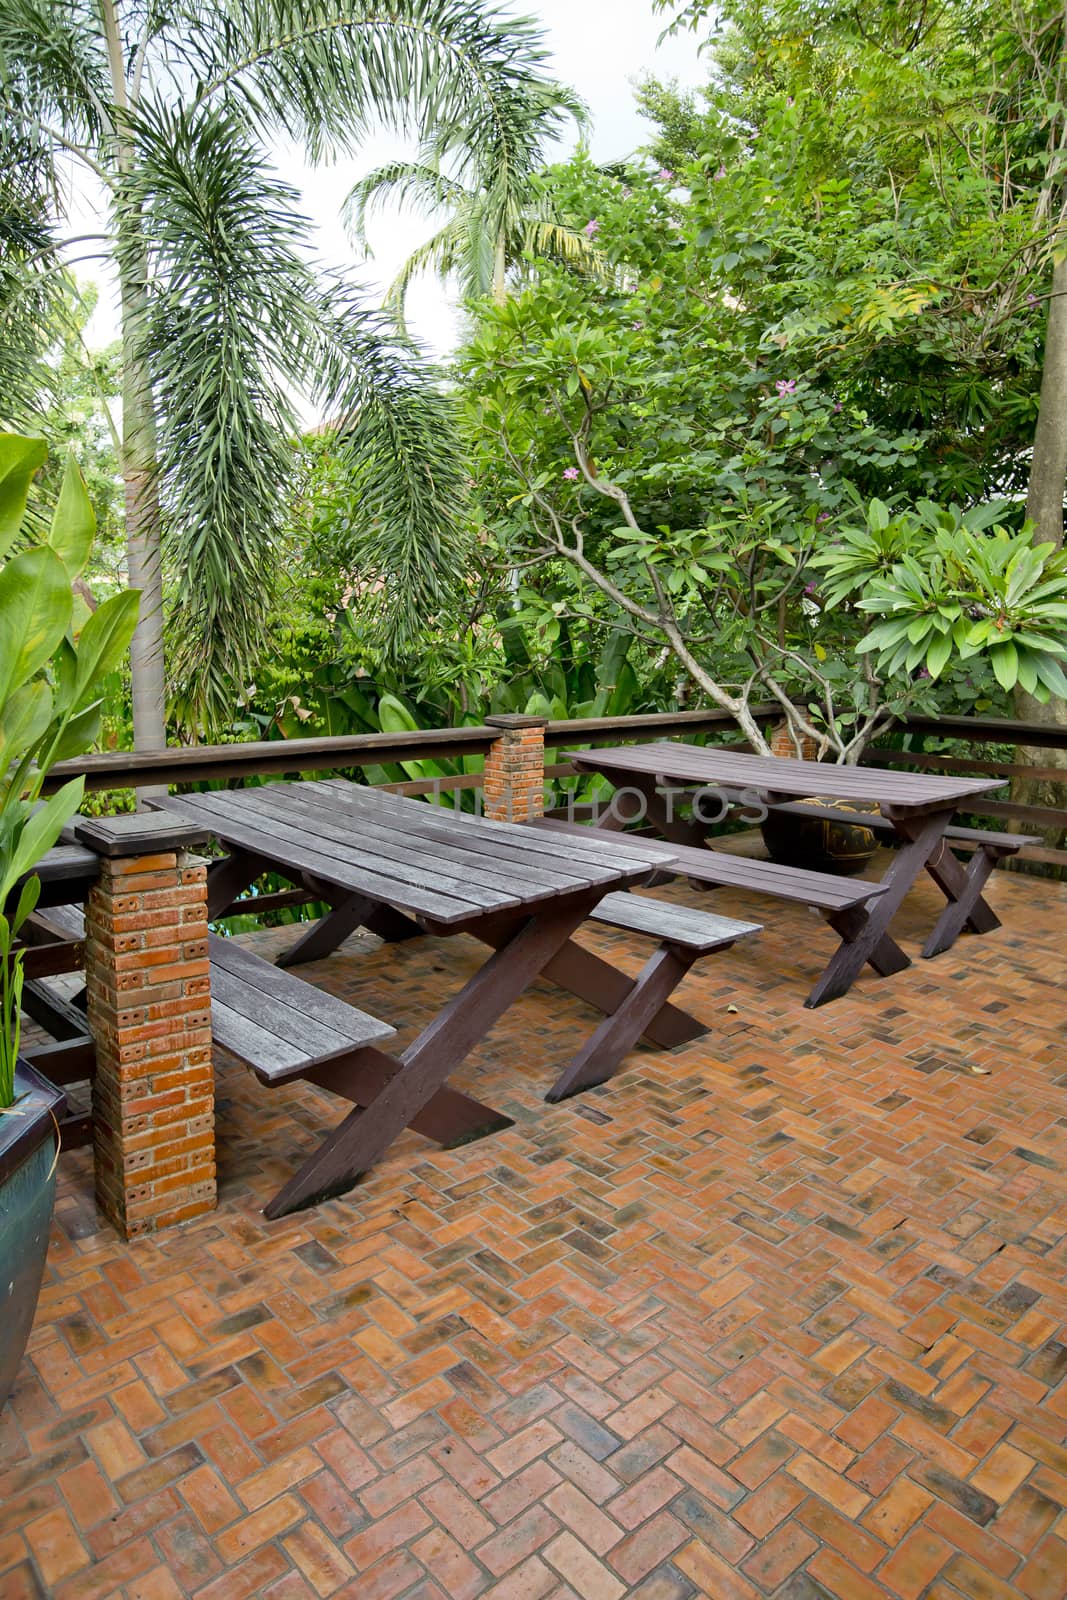 Wooden chairs and table set at balcony in a green plant garden.